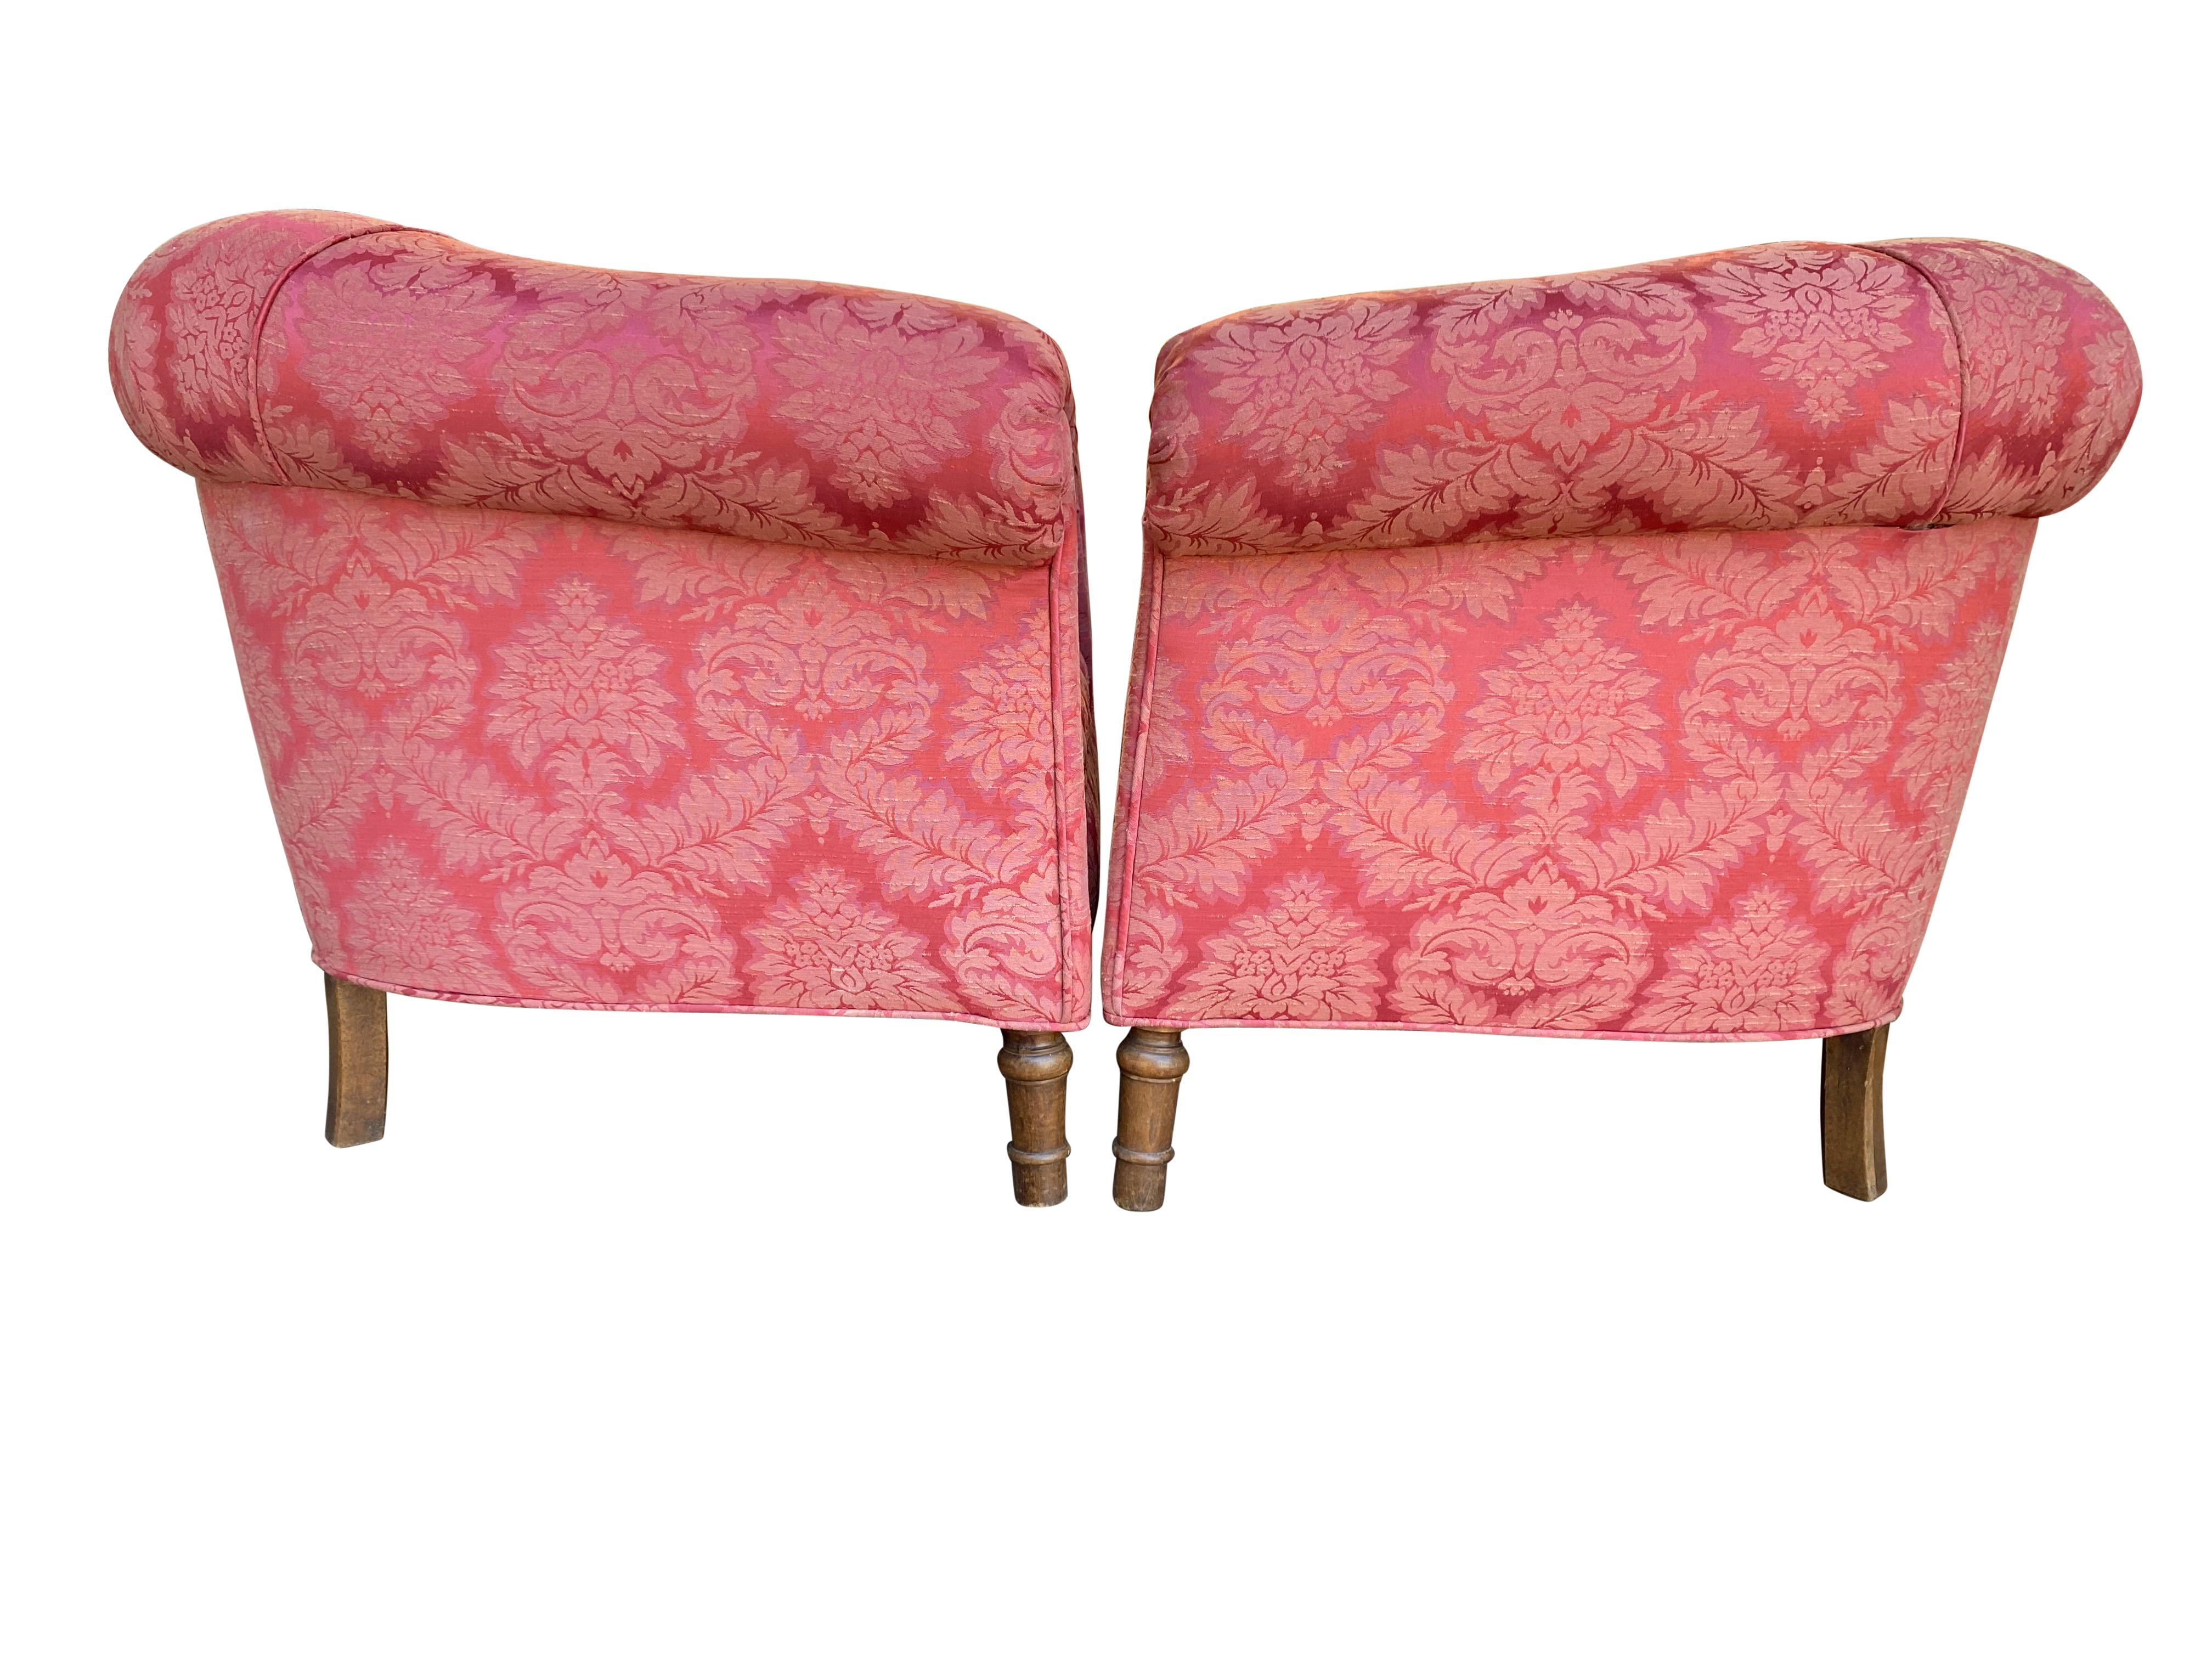 Pair of 1920s Club Chairs in Damask Floral Design For Sale 1